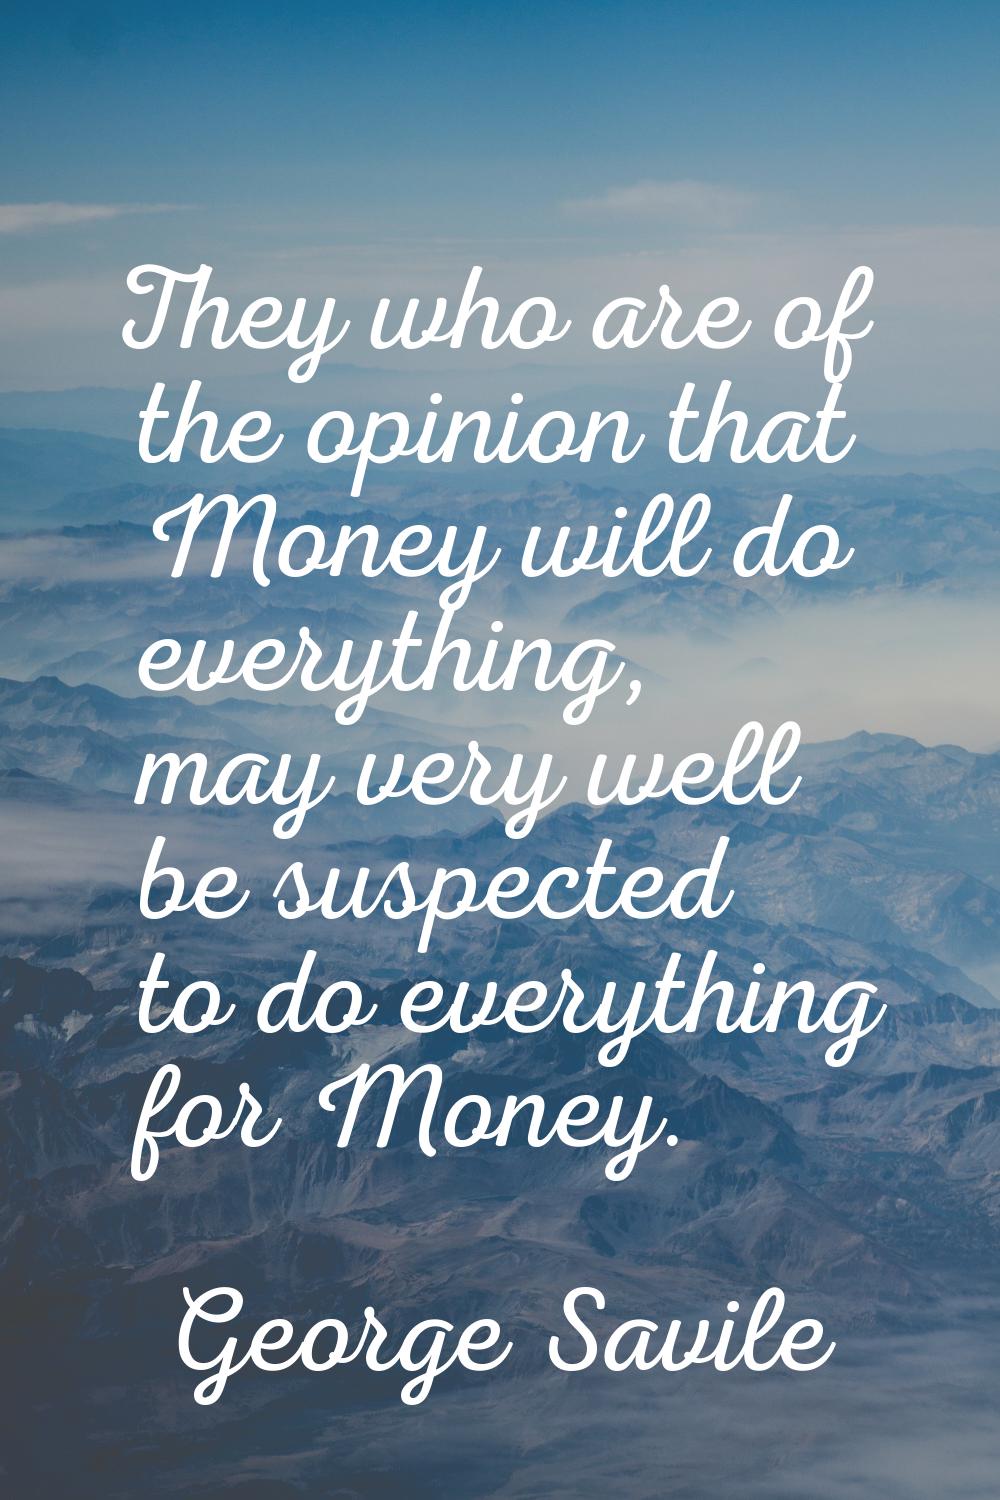 They who are of the opinion that Money will do everything, may very well be suspected to do everyth